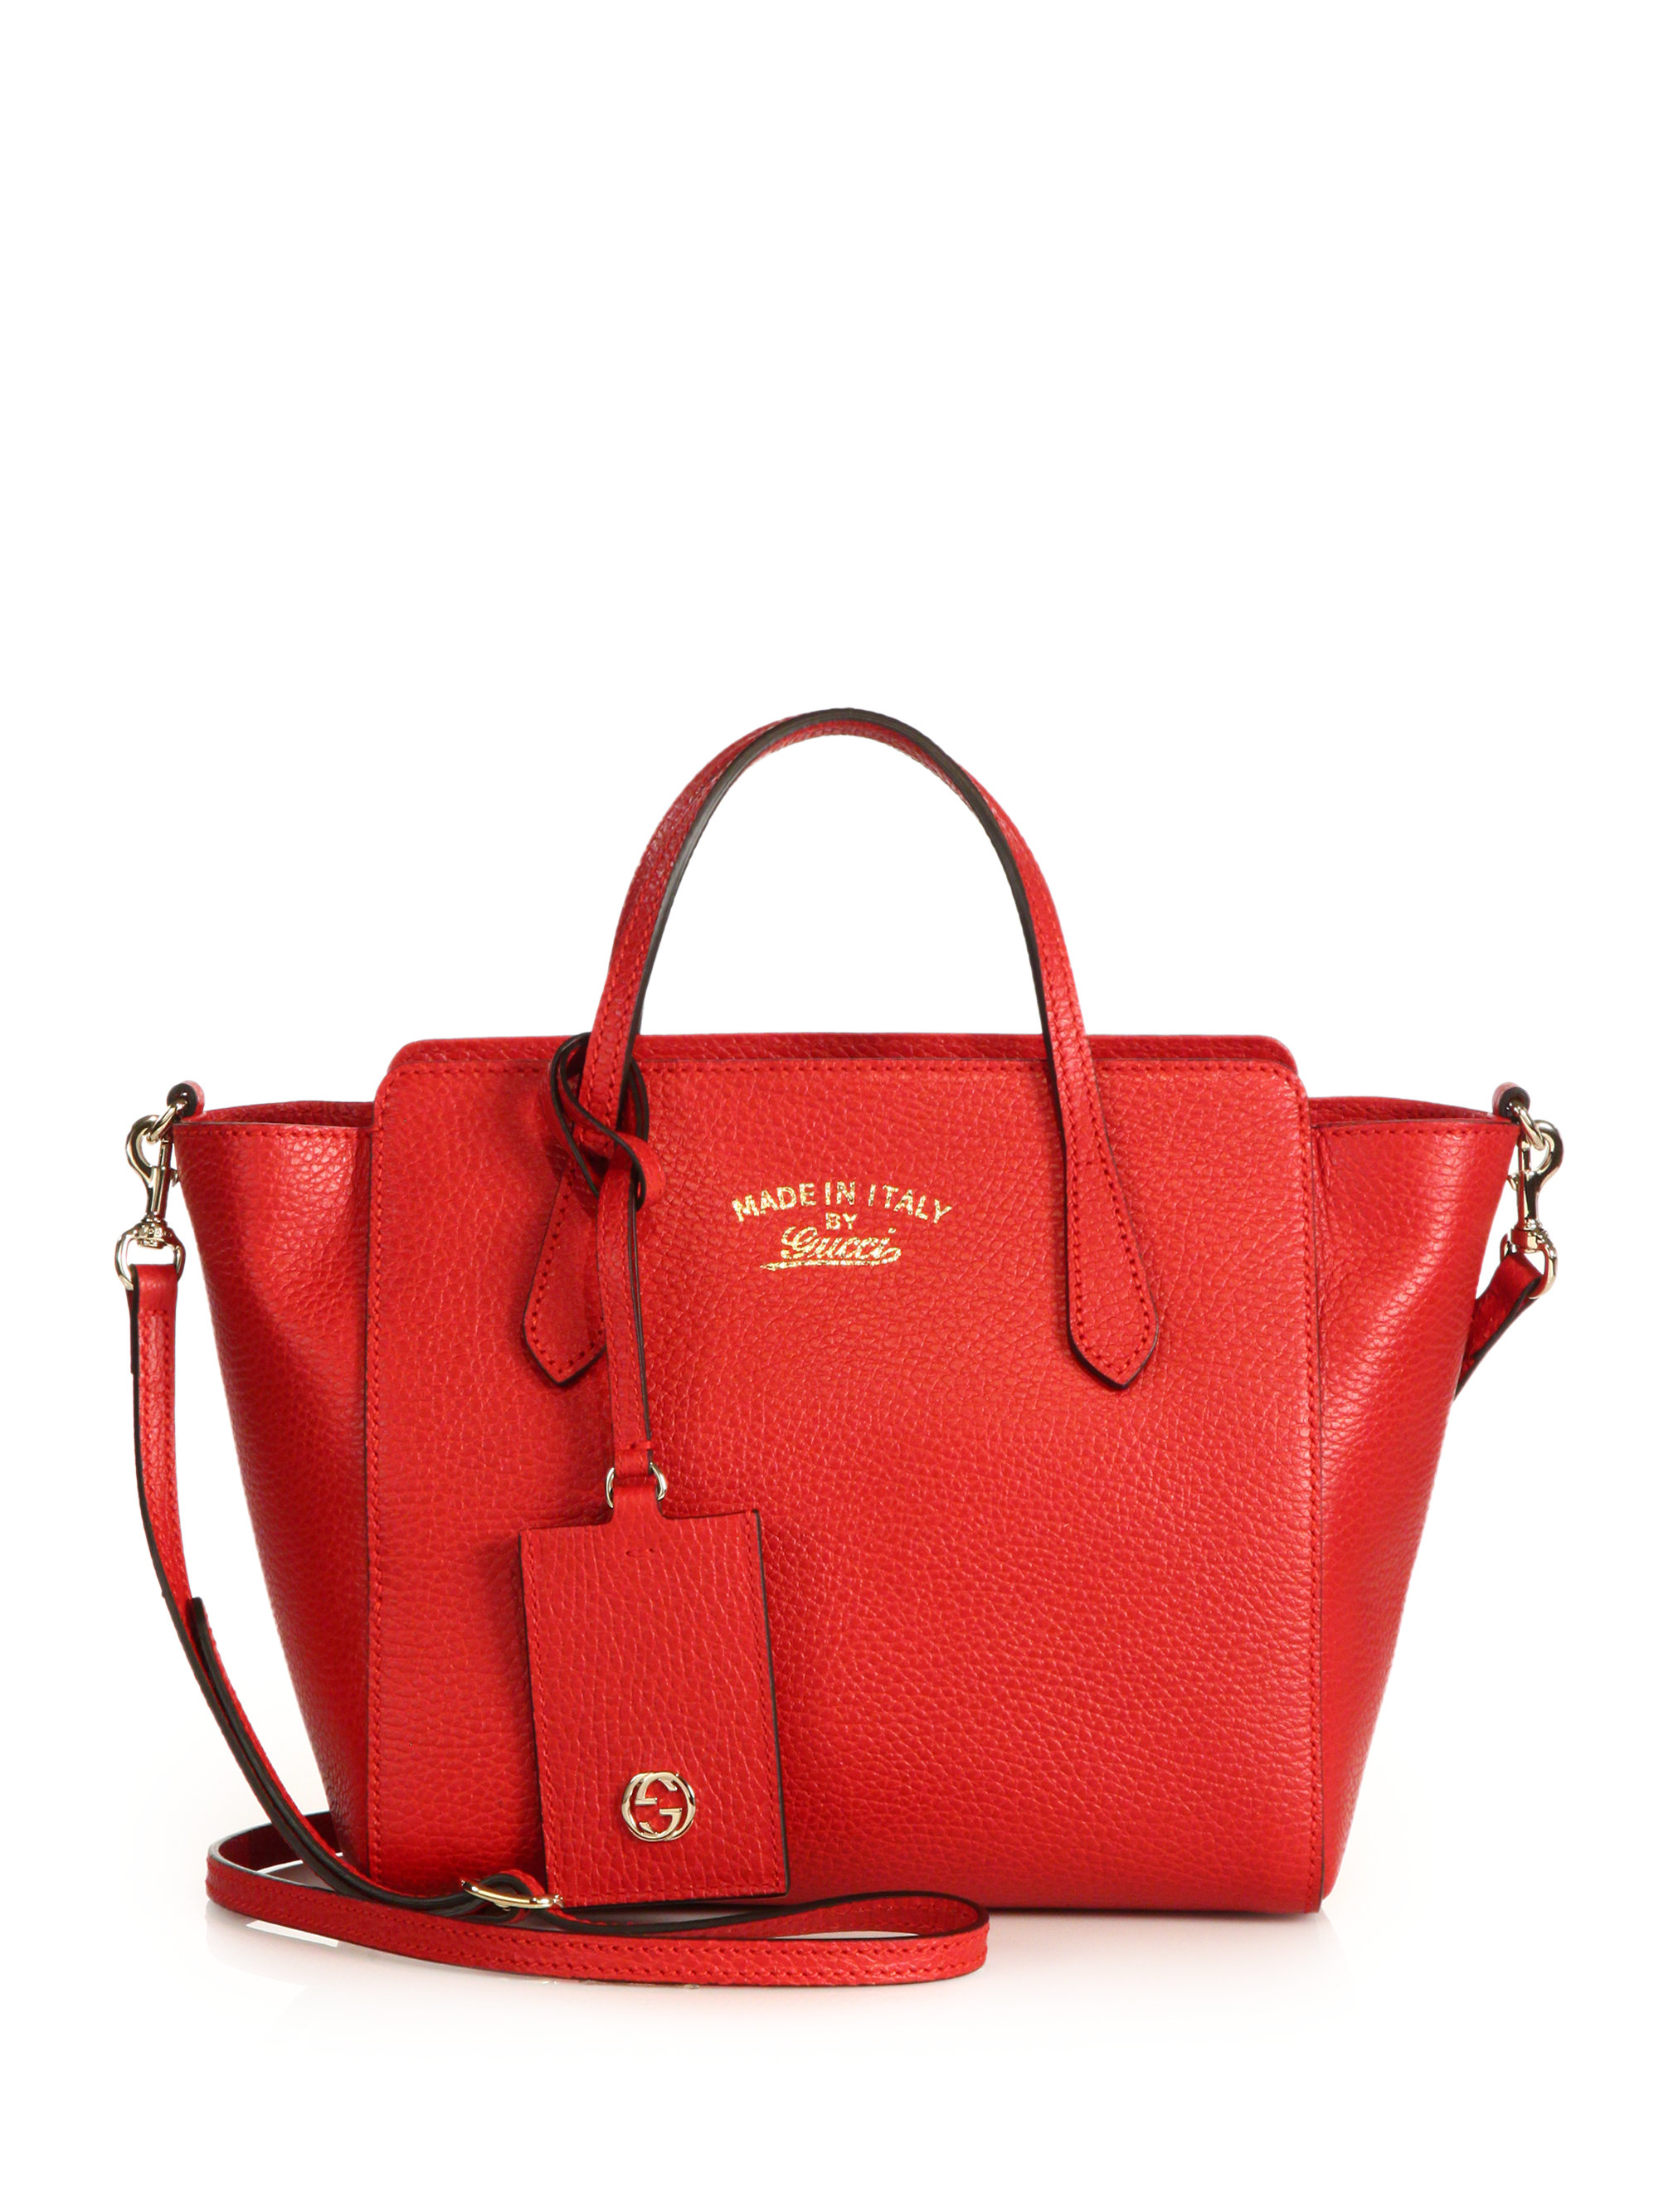 Lyst - Gucci Swing Small Crossbody Bag in Red